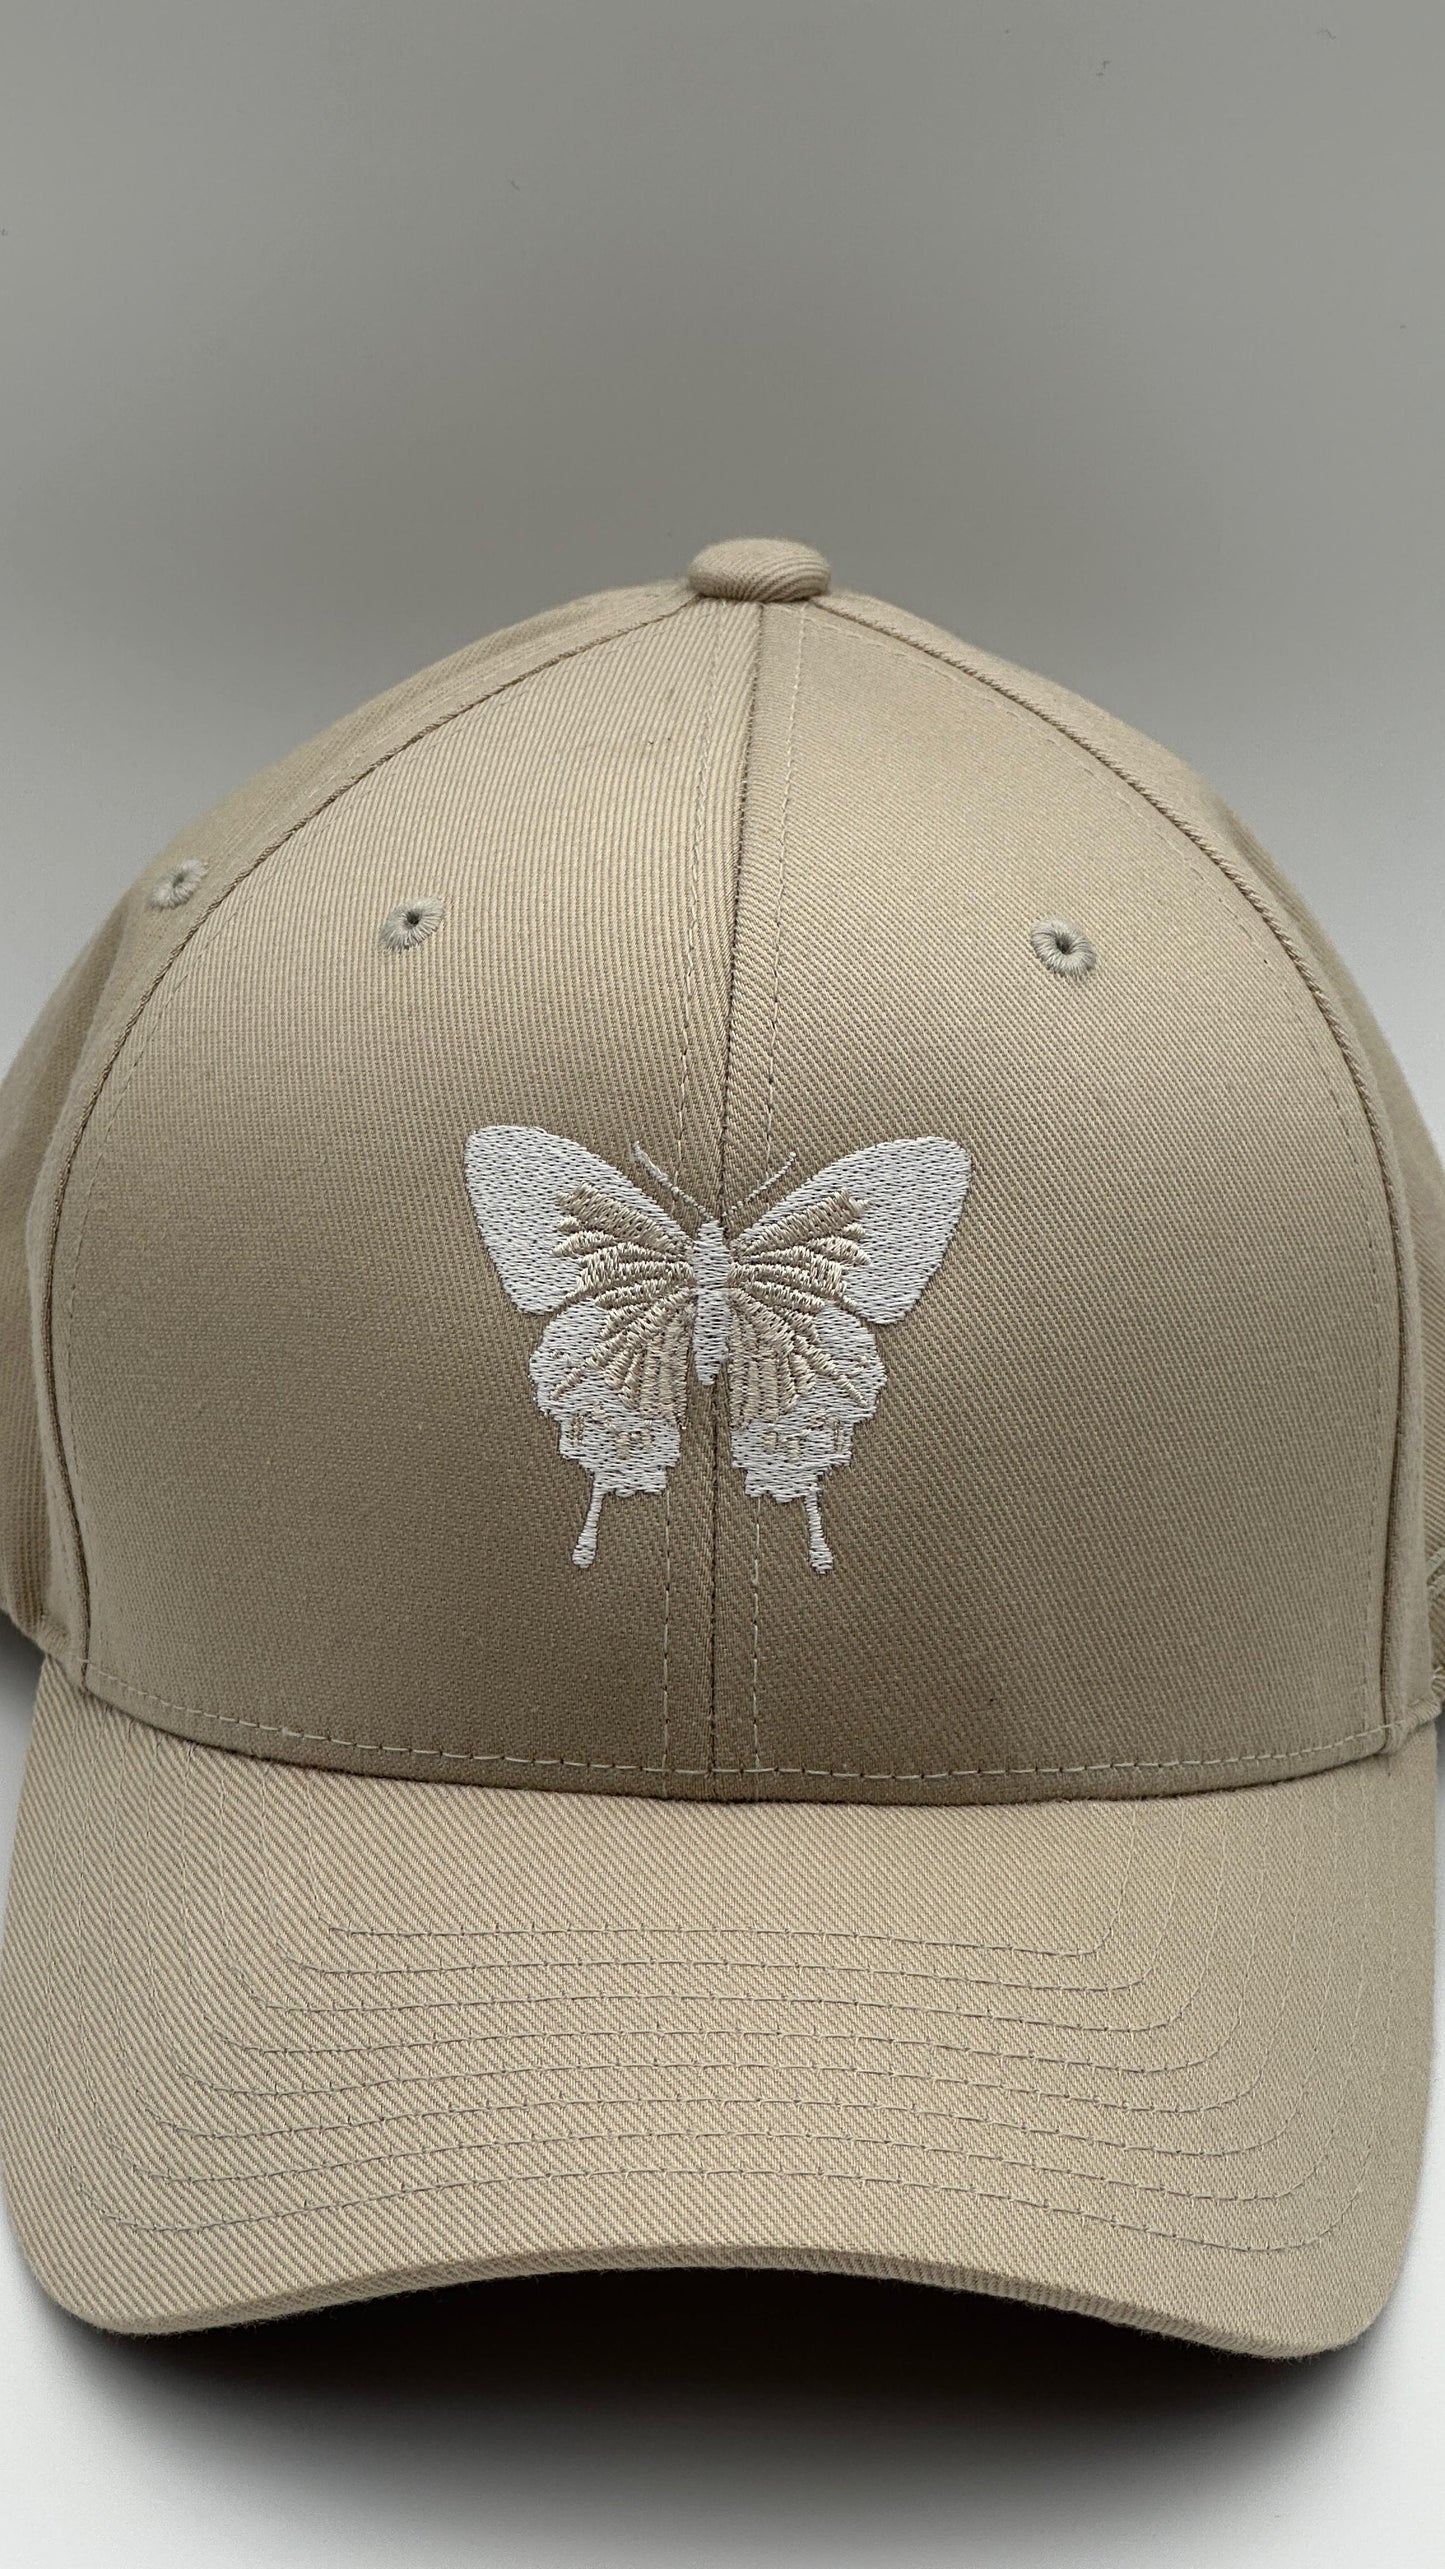 Butterfly Cap white on Brown